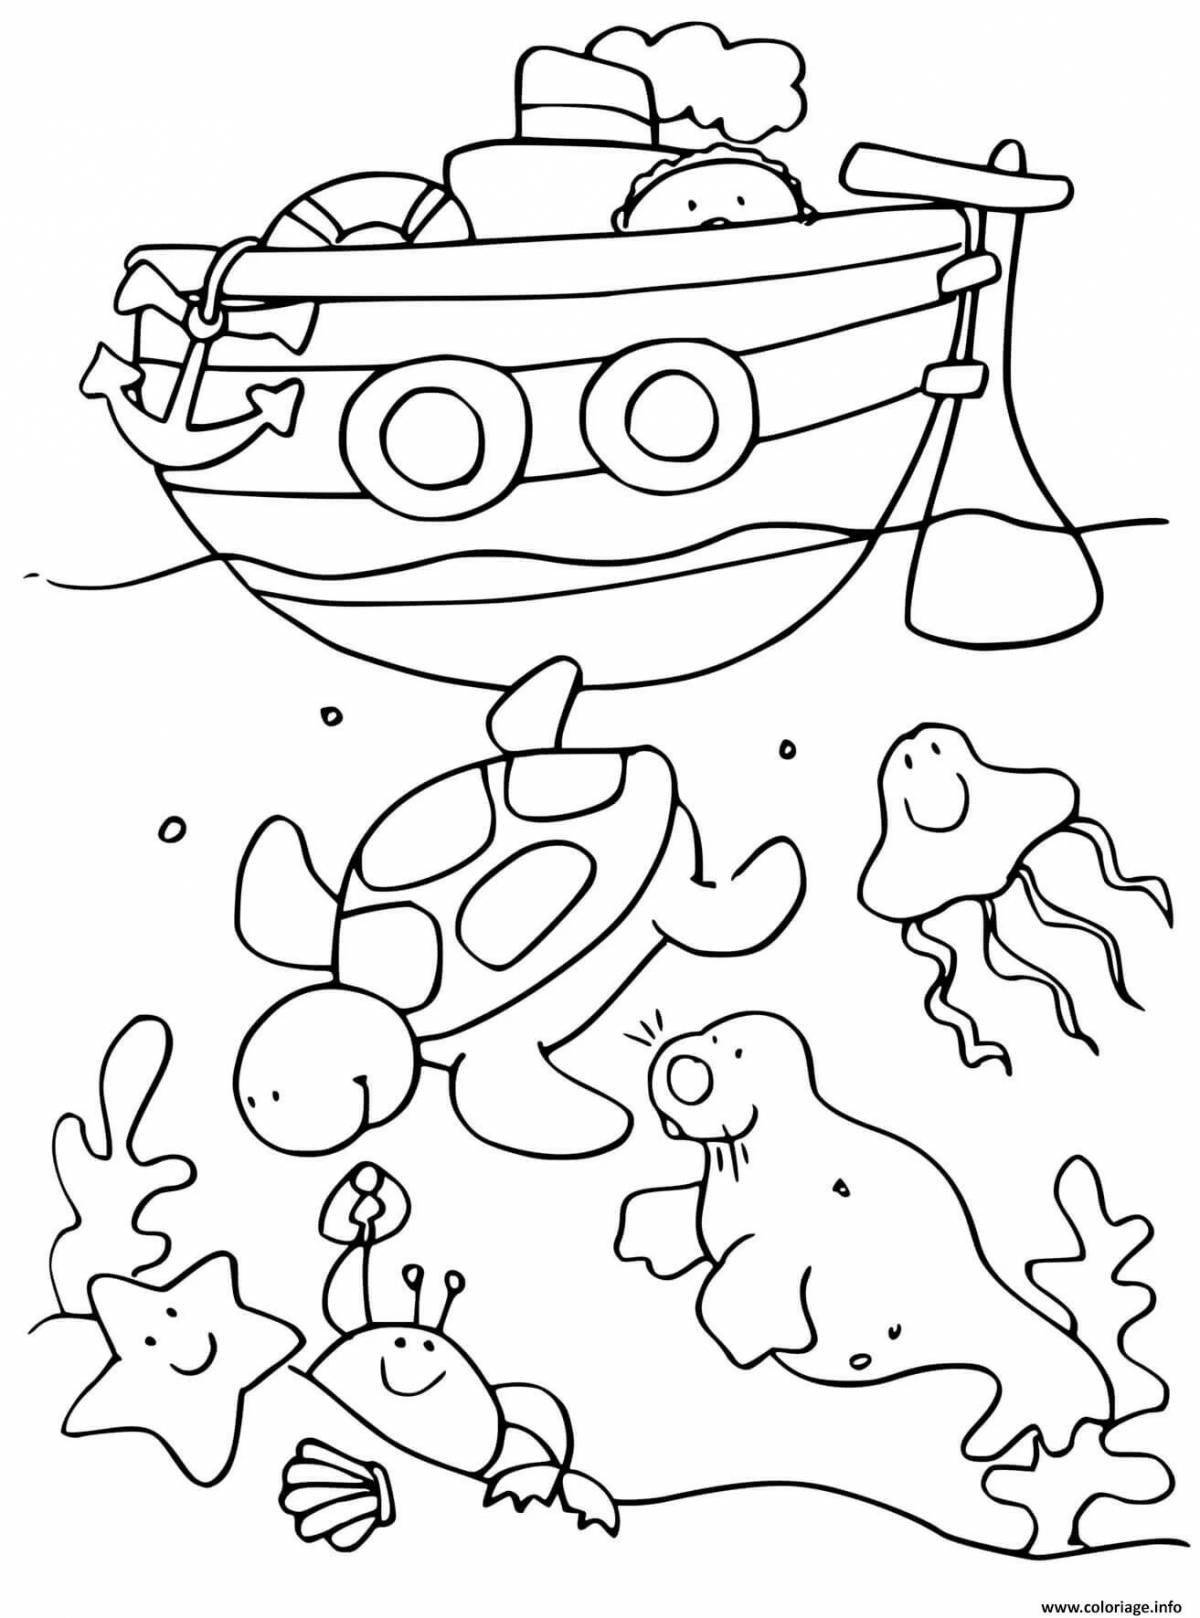 Amazing boat coloring book for 6-7 year olds